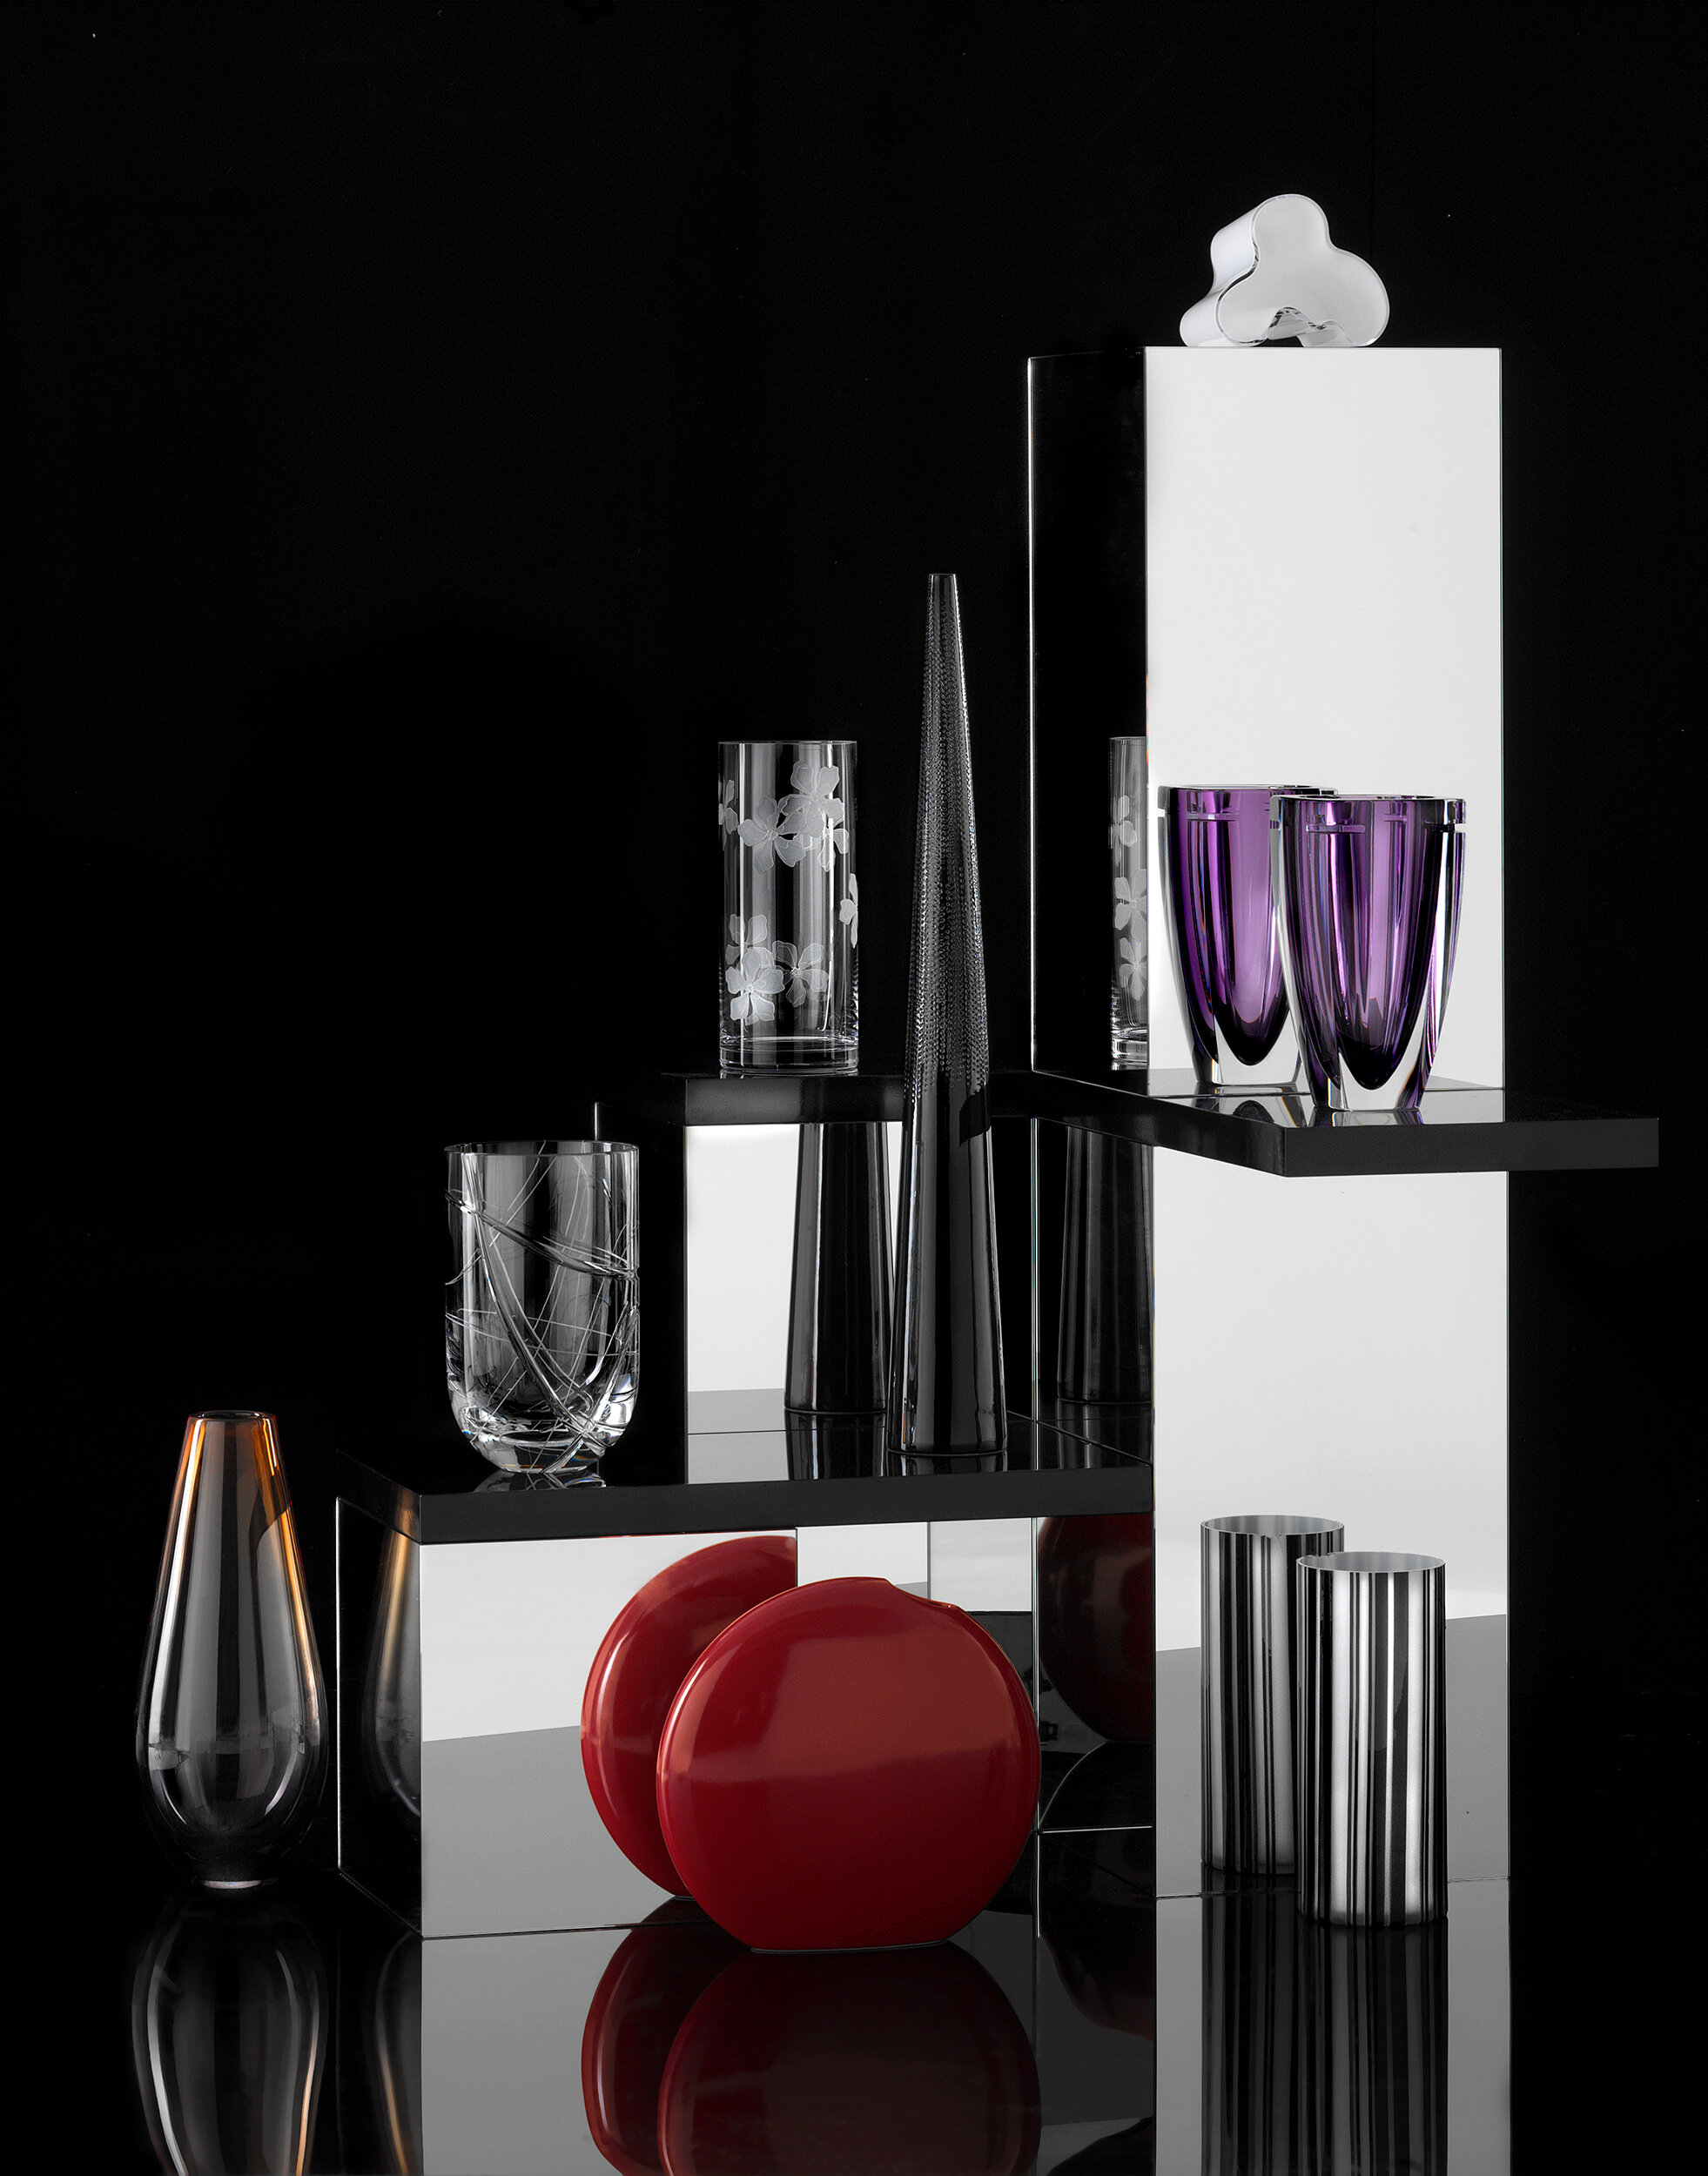  John Lewis vases featured in ‘Objects of desire’ 